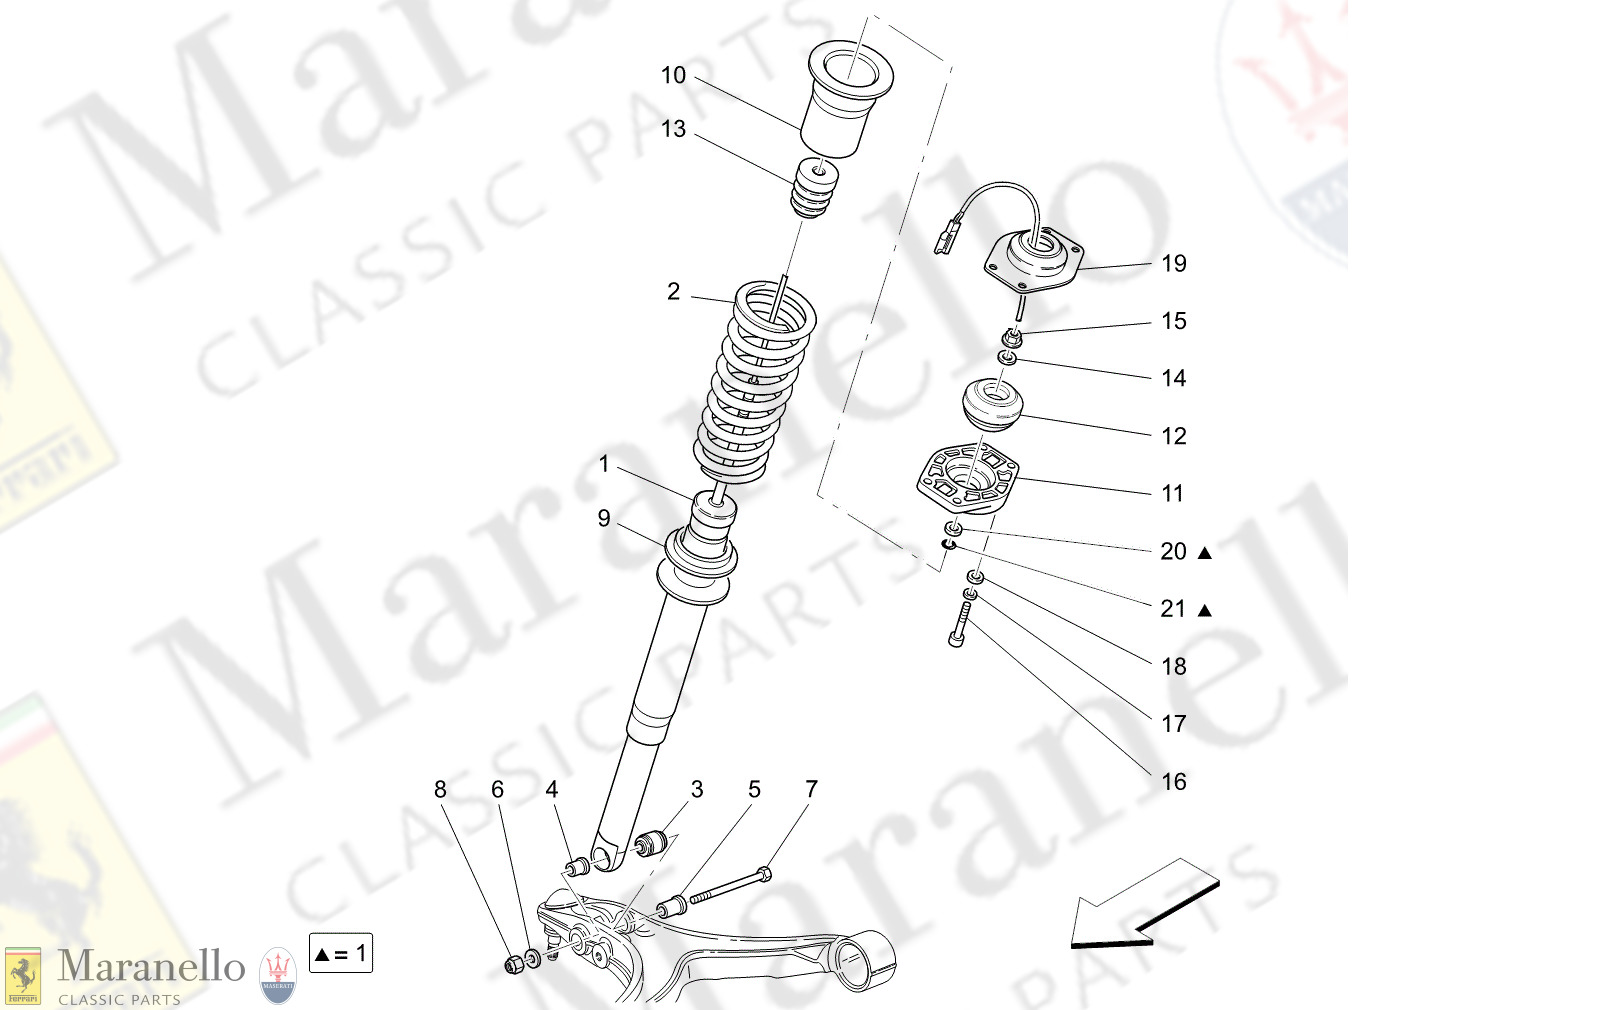 06.11 - 17 - 0611 - 17 Front Shock Absorber Devices